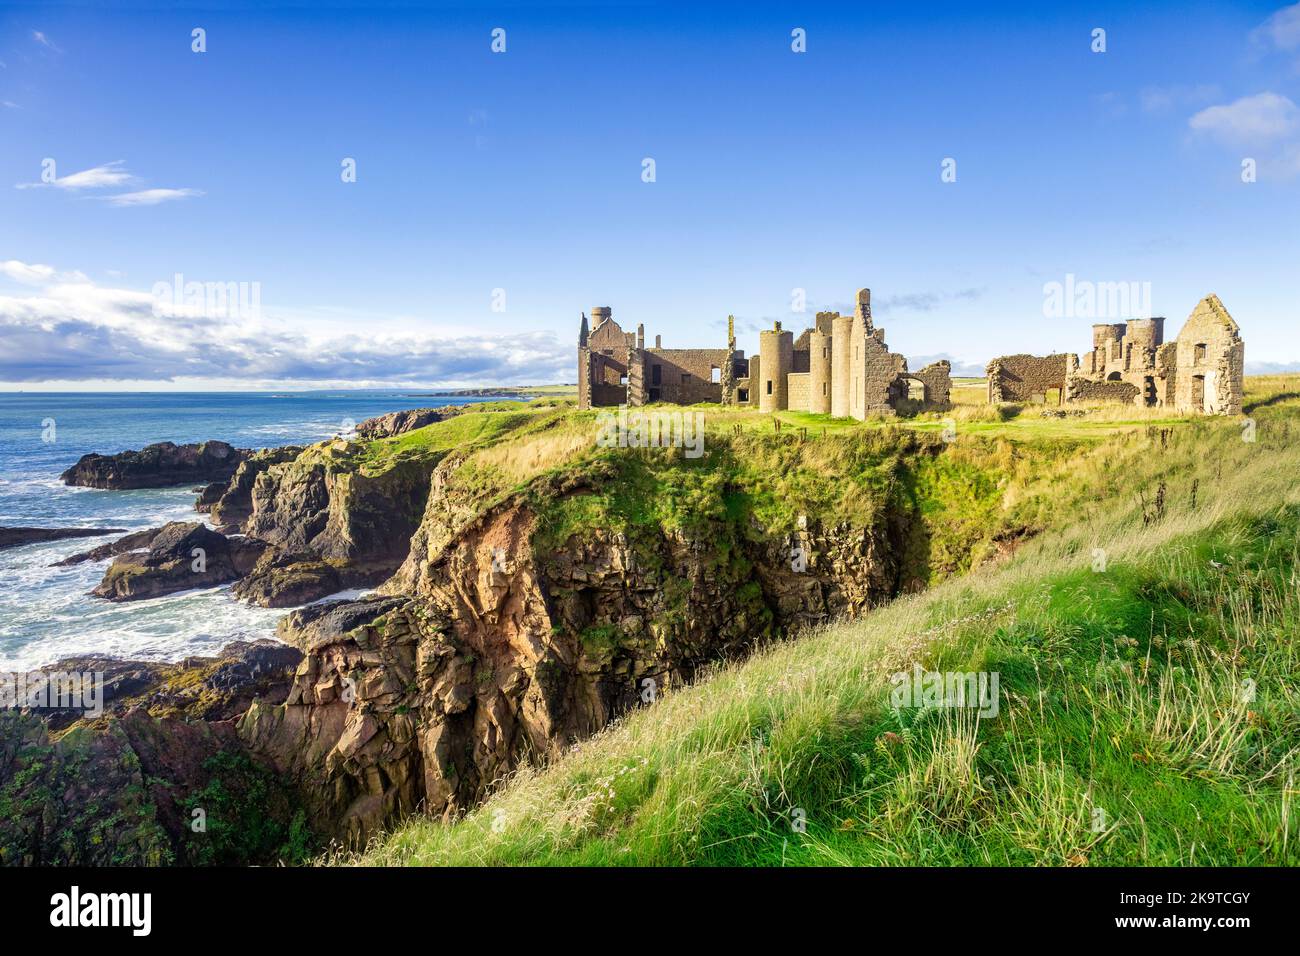 12 September 2022: Aberdeenshire, Scotland - The ruins of New Slains Castle,  built in the 16th century by the 9th Earl of Erroll, showing its... Stock Photo